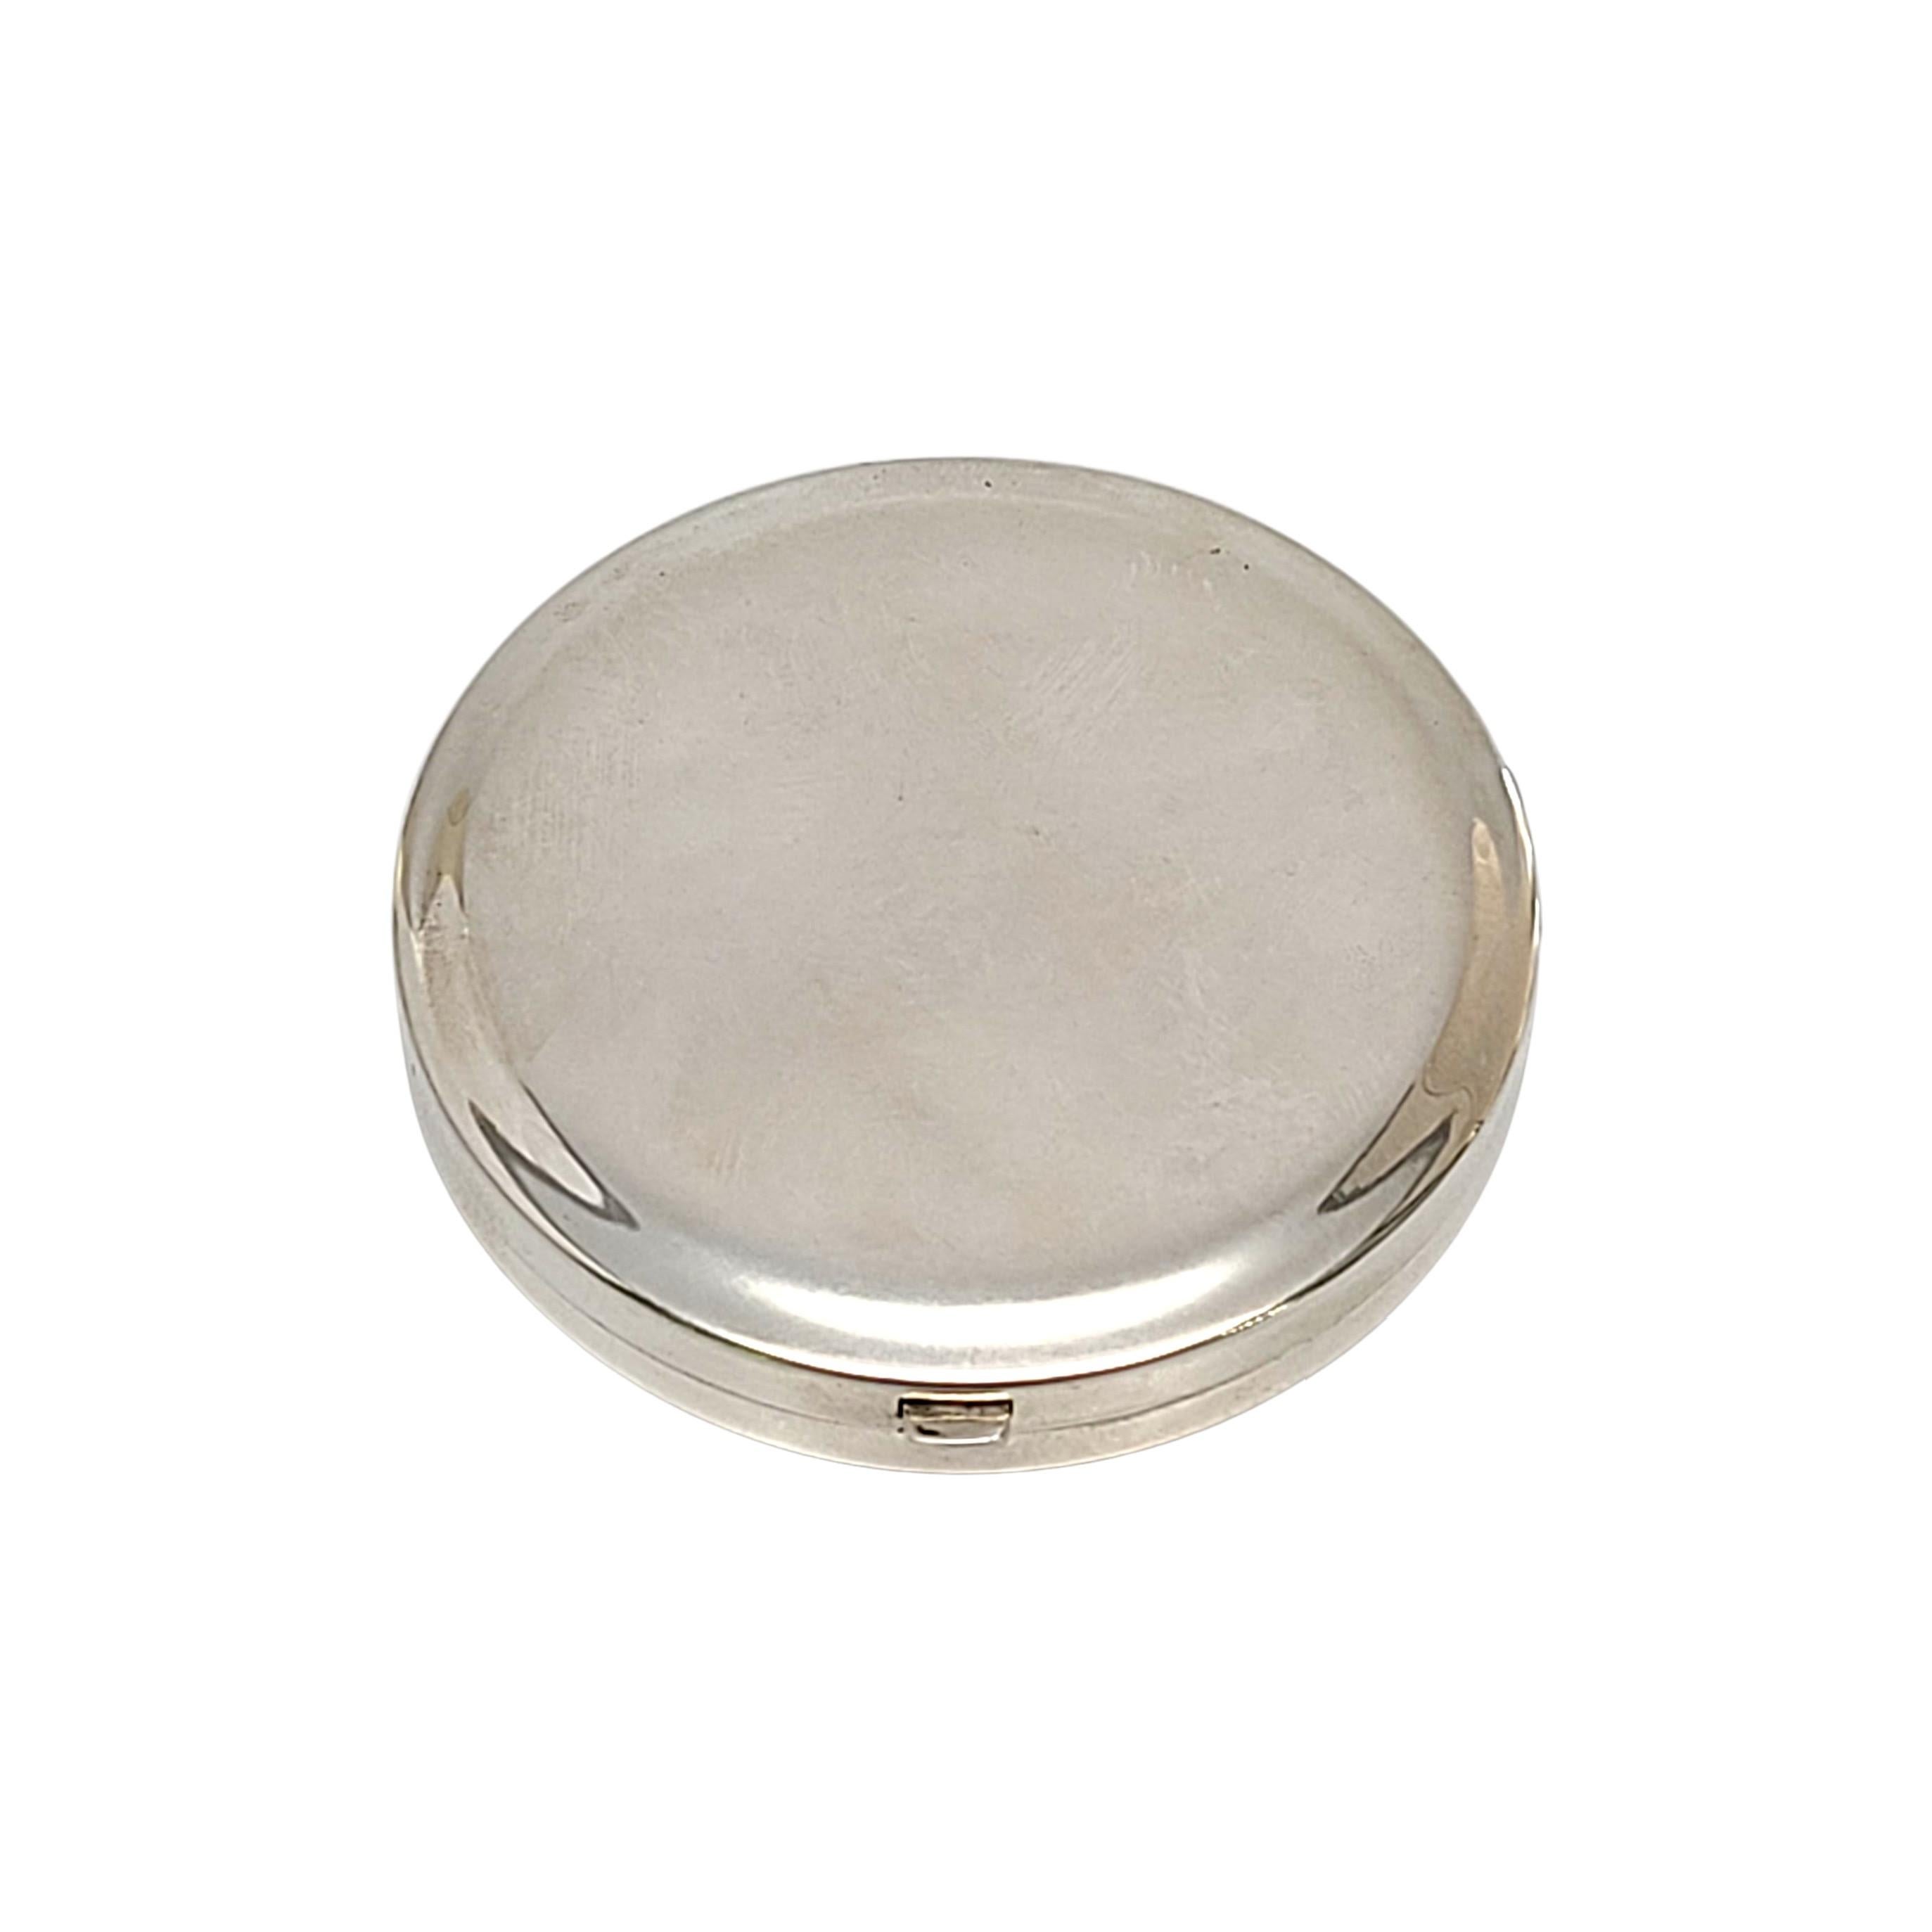 Sterling silver round mirror compact pendant by Tiffany & Co.

Beautiful simple, classic and timeless polished design. Push button release opens to a mirrored inside lid, includes powder puff and screen. Tiffany & Co box and pouch not included.

Ni